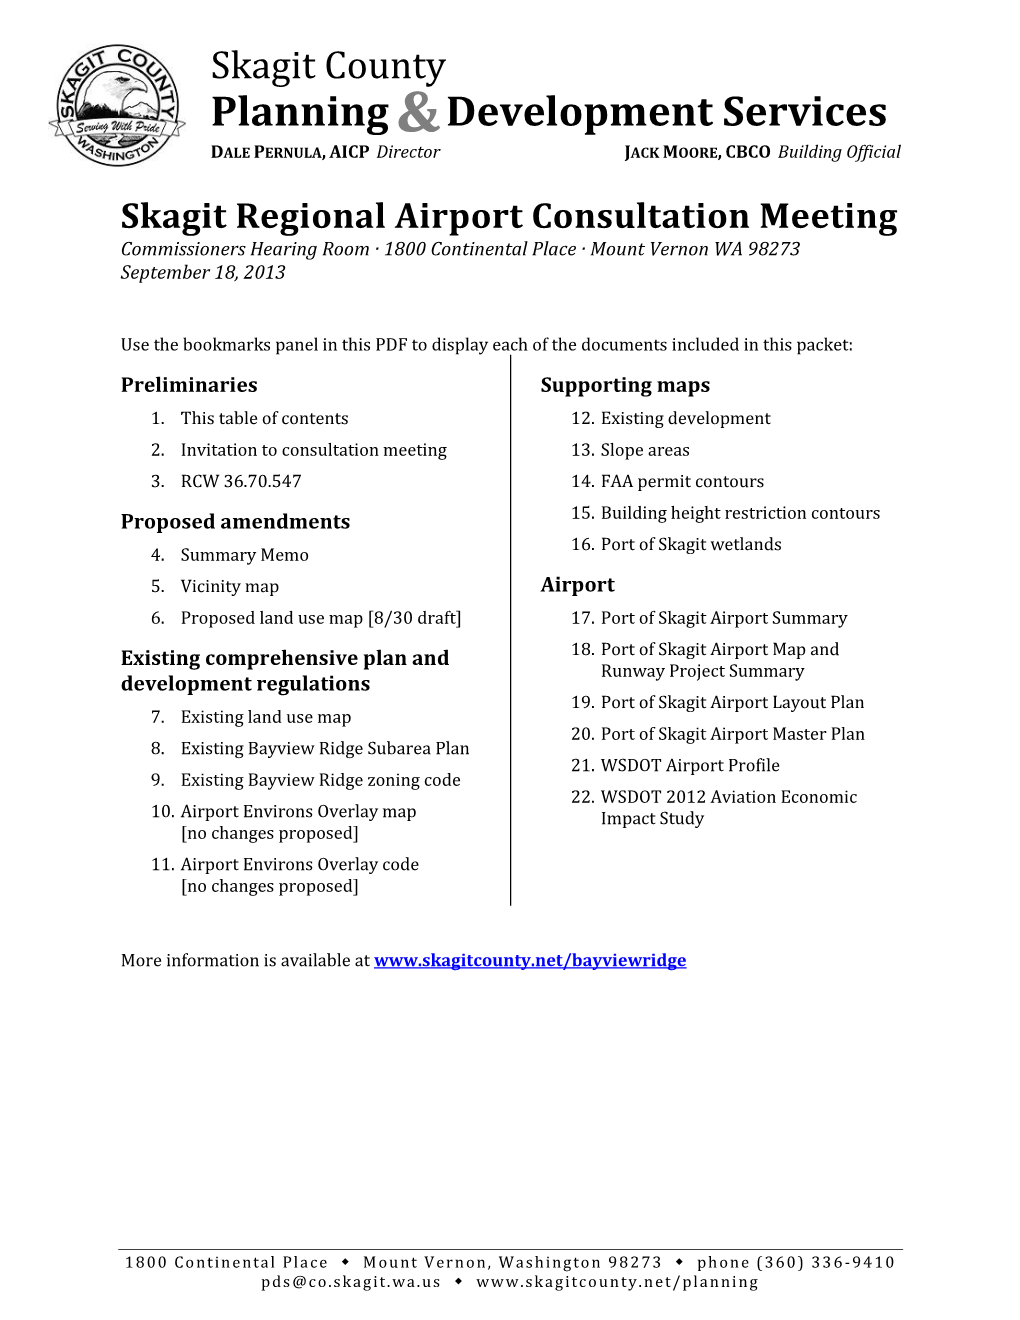 Skagit Regional Airport Consultation Meeting Commissioners Hearing Room · 1800 Continental Place · Mount Vernon WA 98273 September 18, 2013